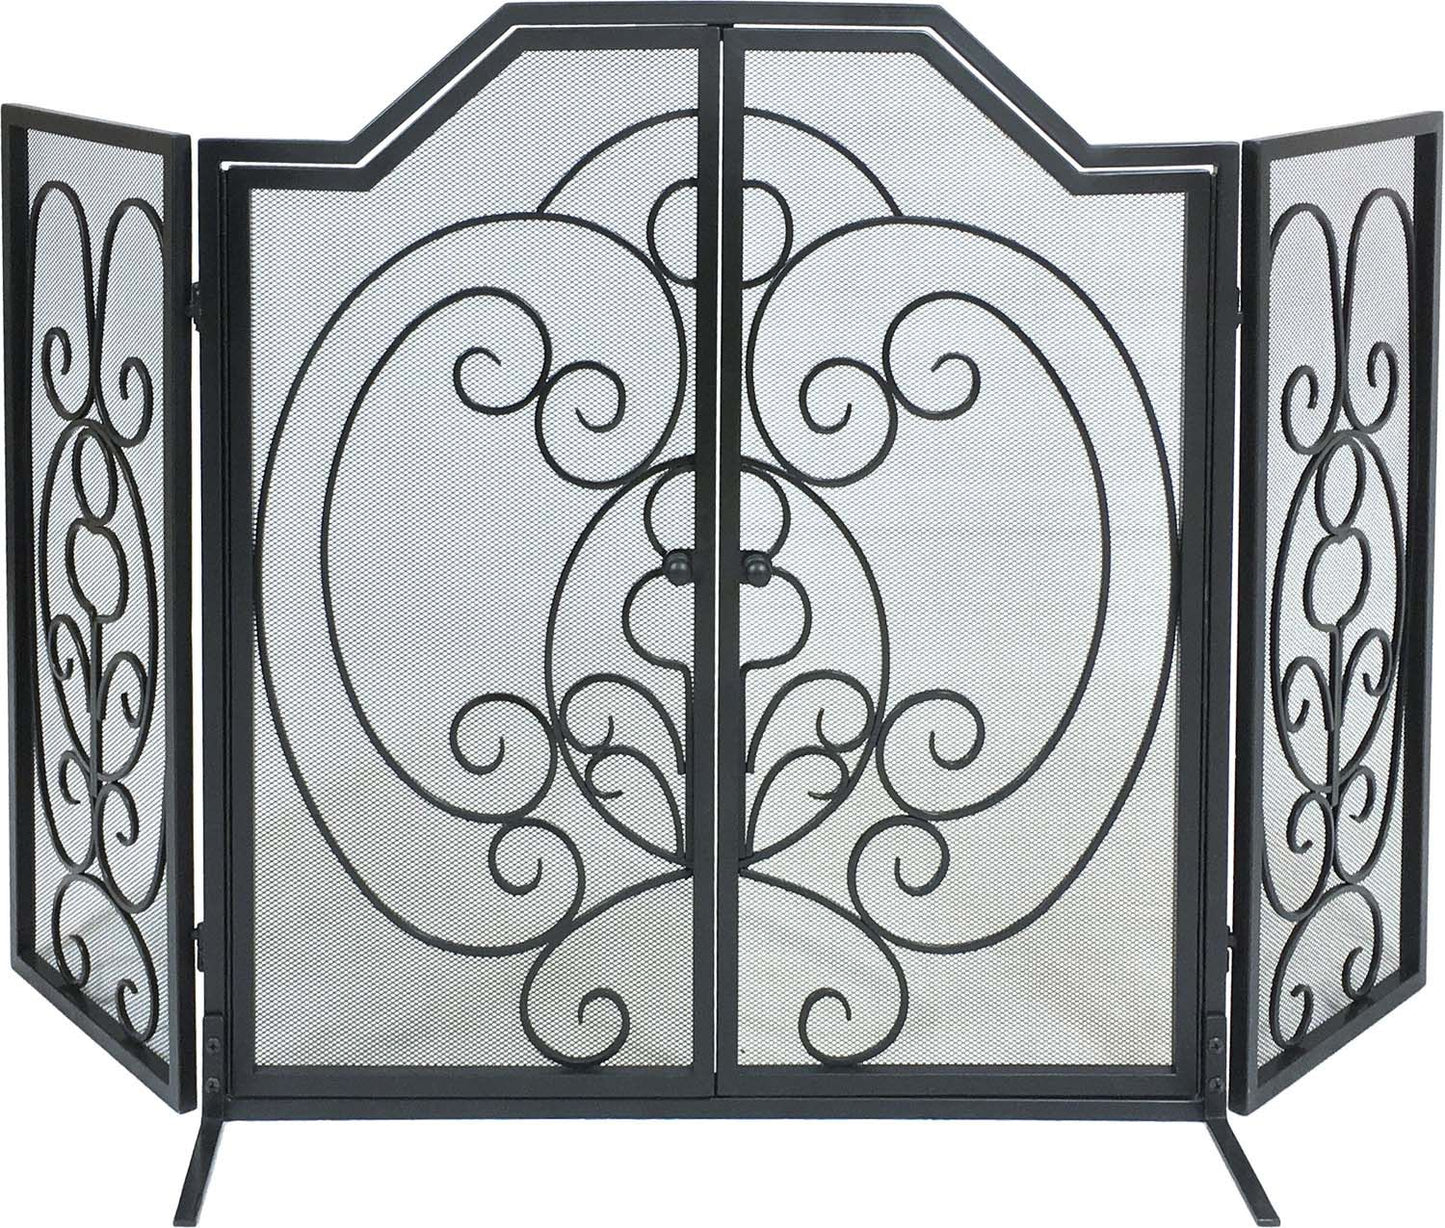 Dagan Industries 55" x 32" Three Fold Center Arched Scroll Design Black Wrought Iron Screen with Doors